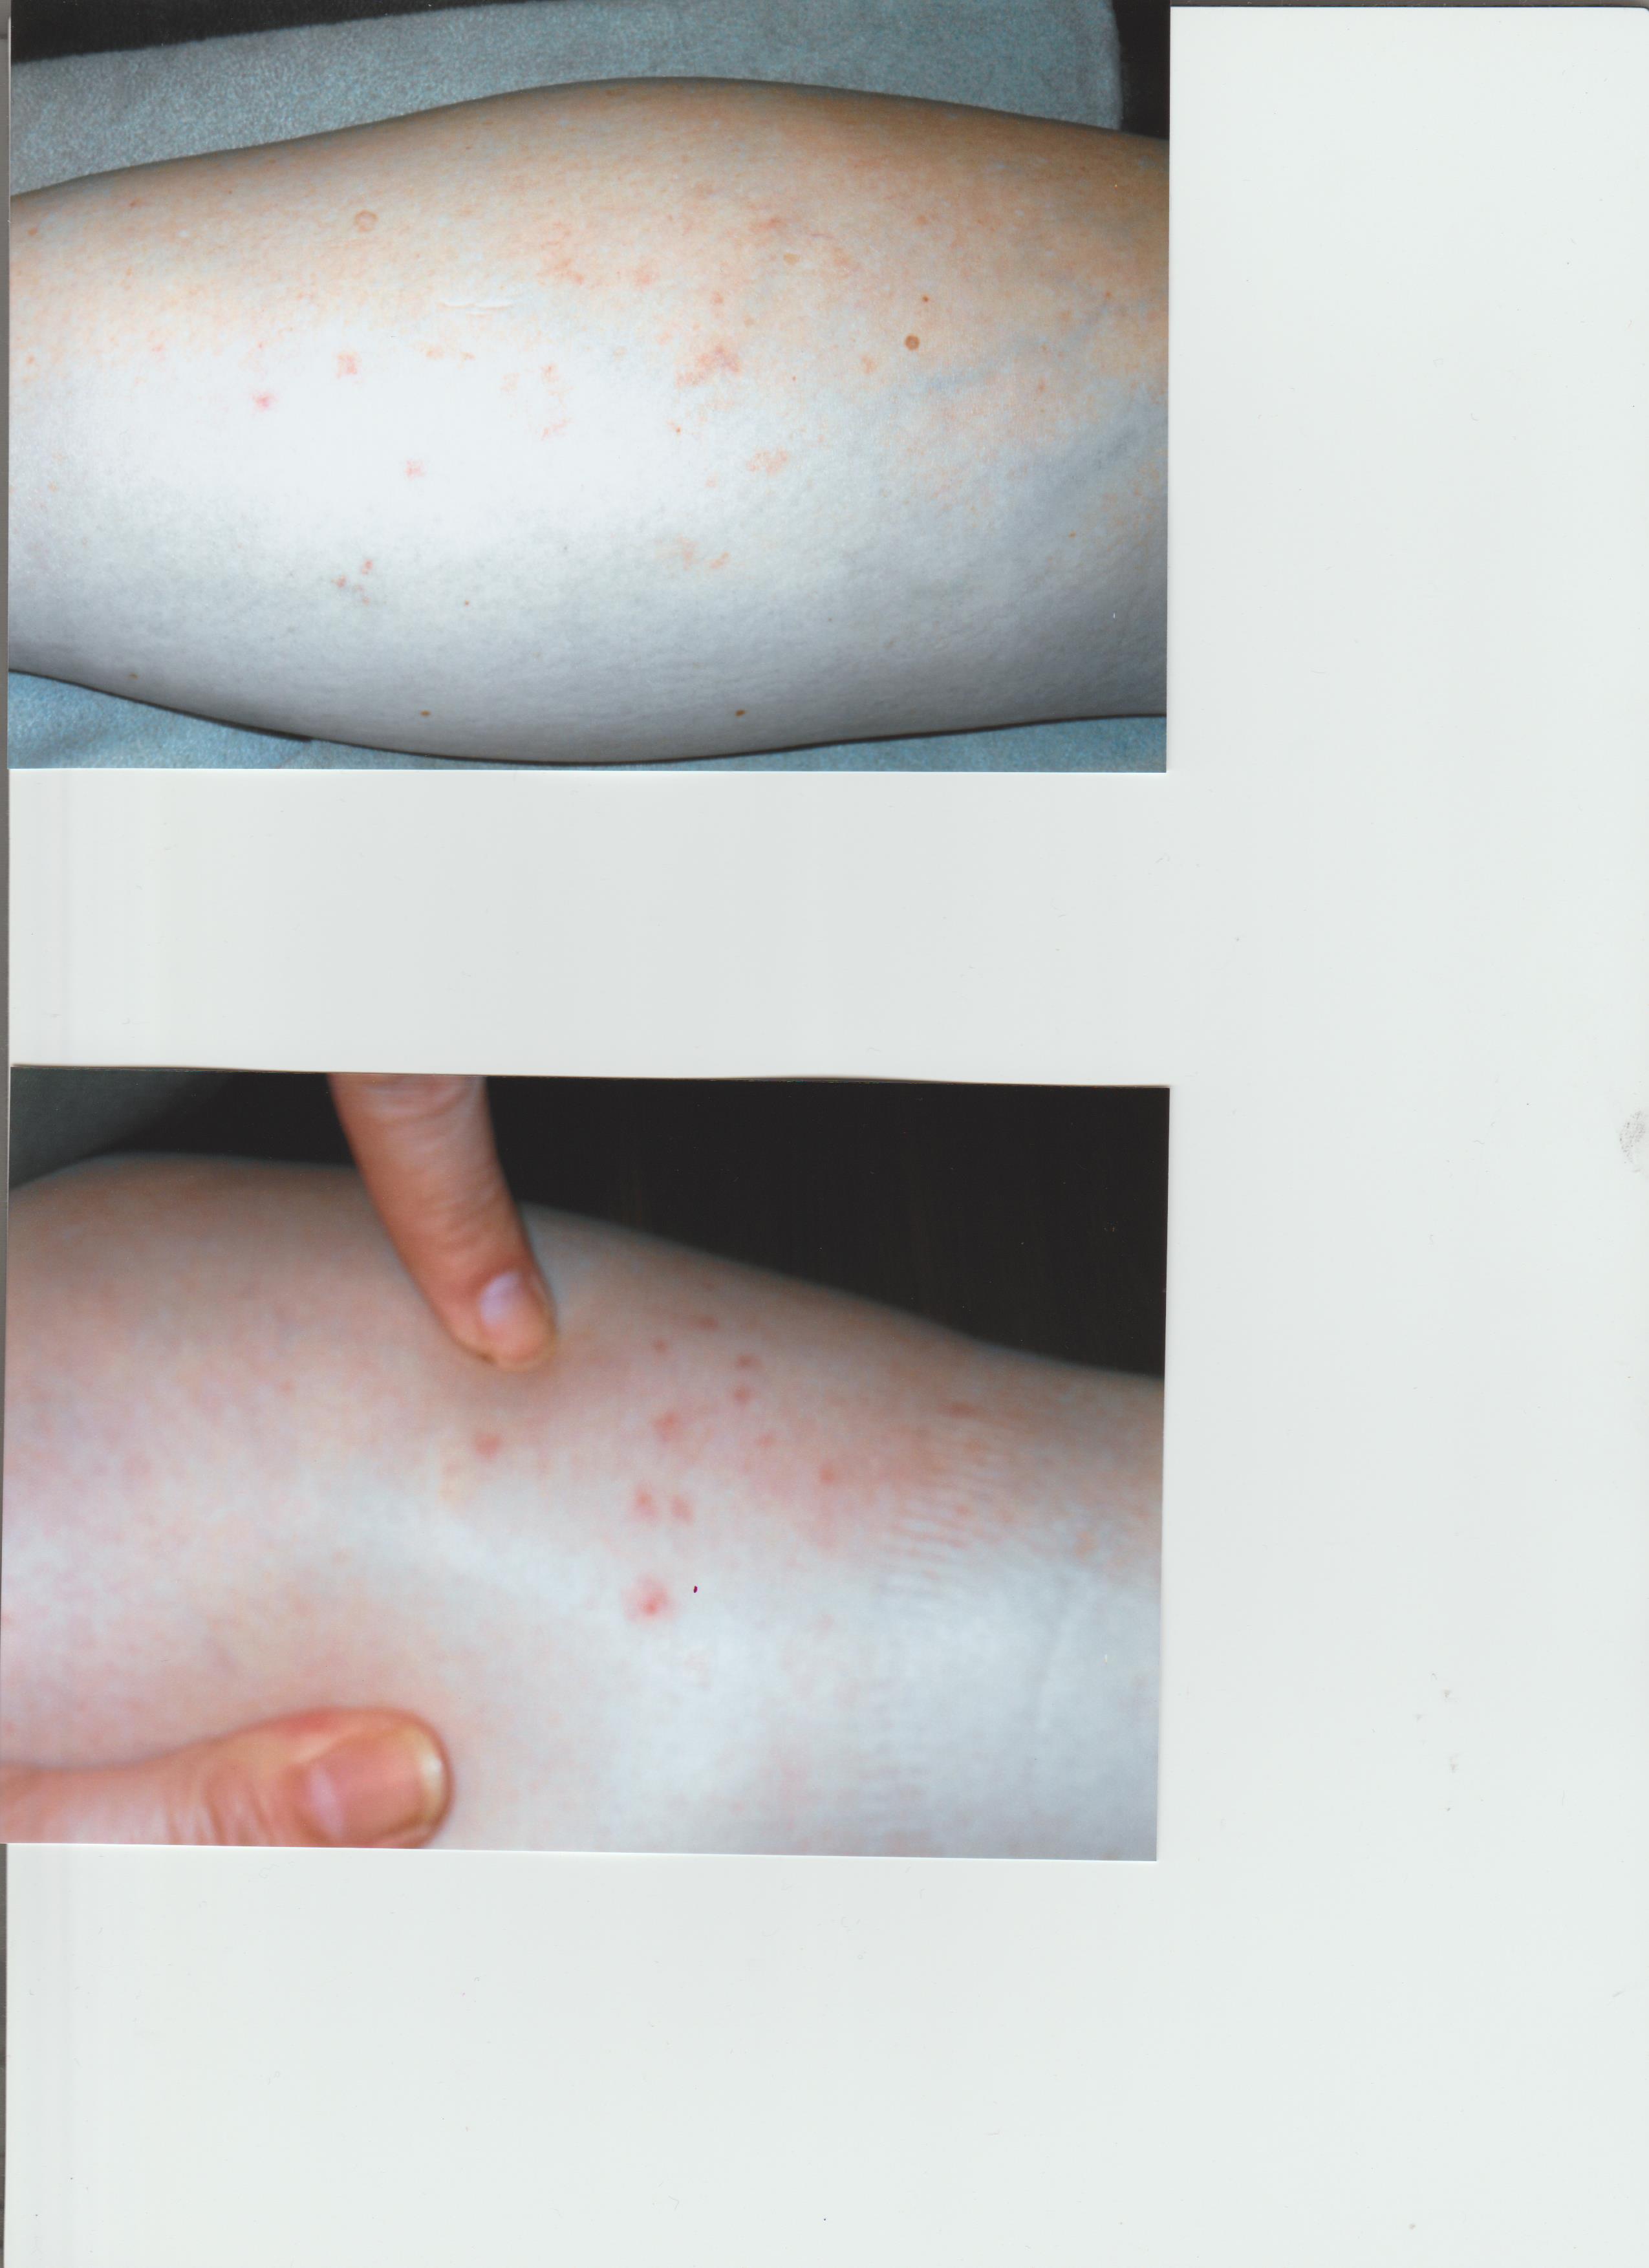 Rash on both legs.  It was worse than this.  My arms were covered in it.  My left arm got the worse of the chemical burn. 